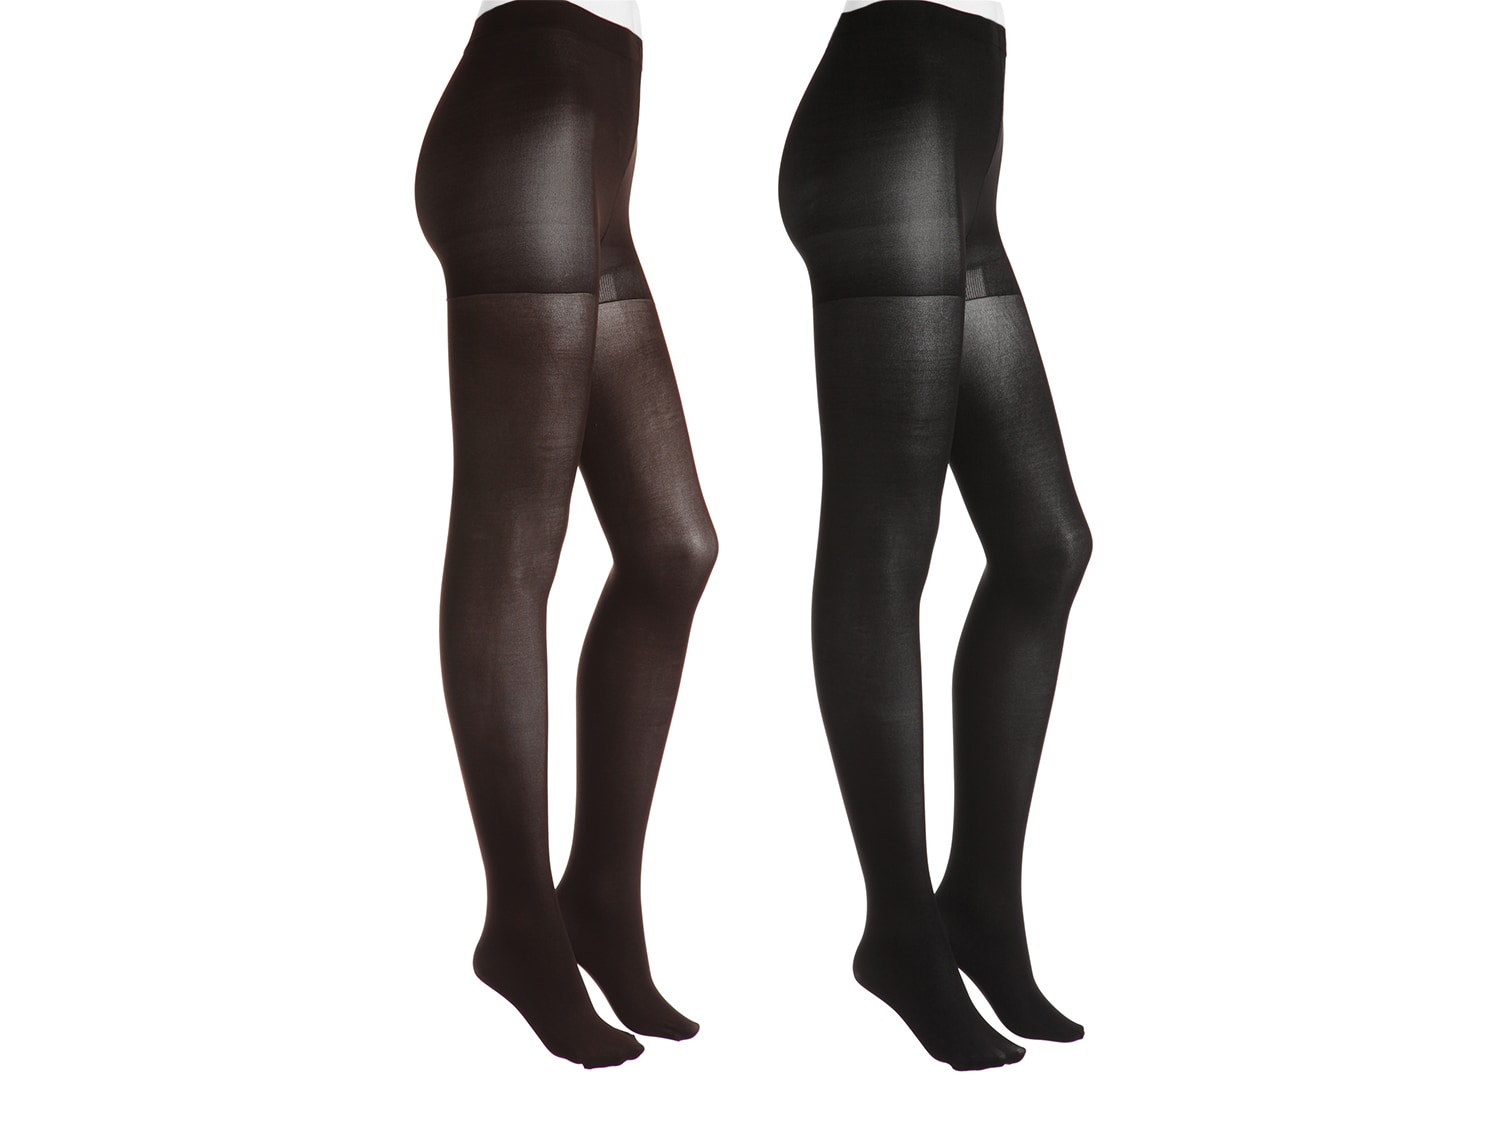 HUE Hosiery Control Top Women's Tights - 2 Pack - Free Shipping